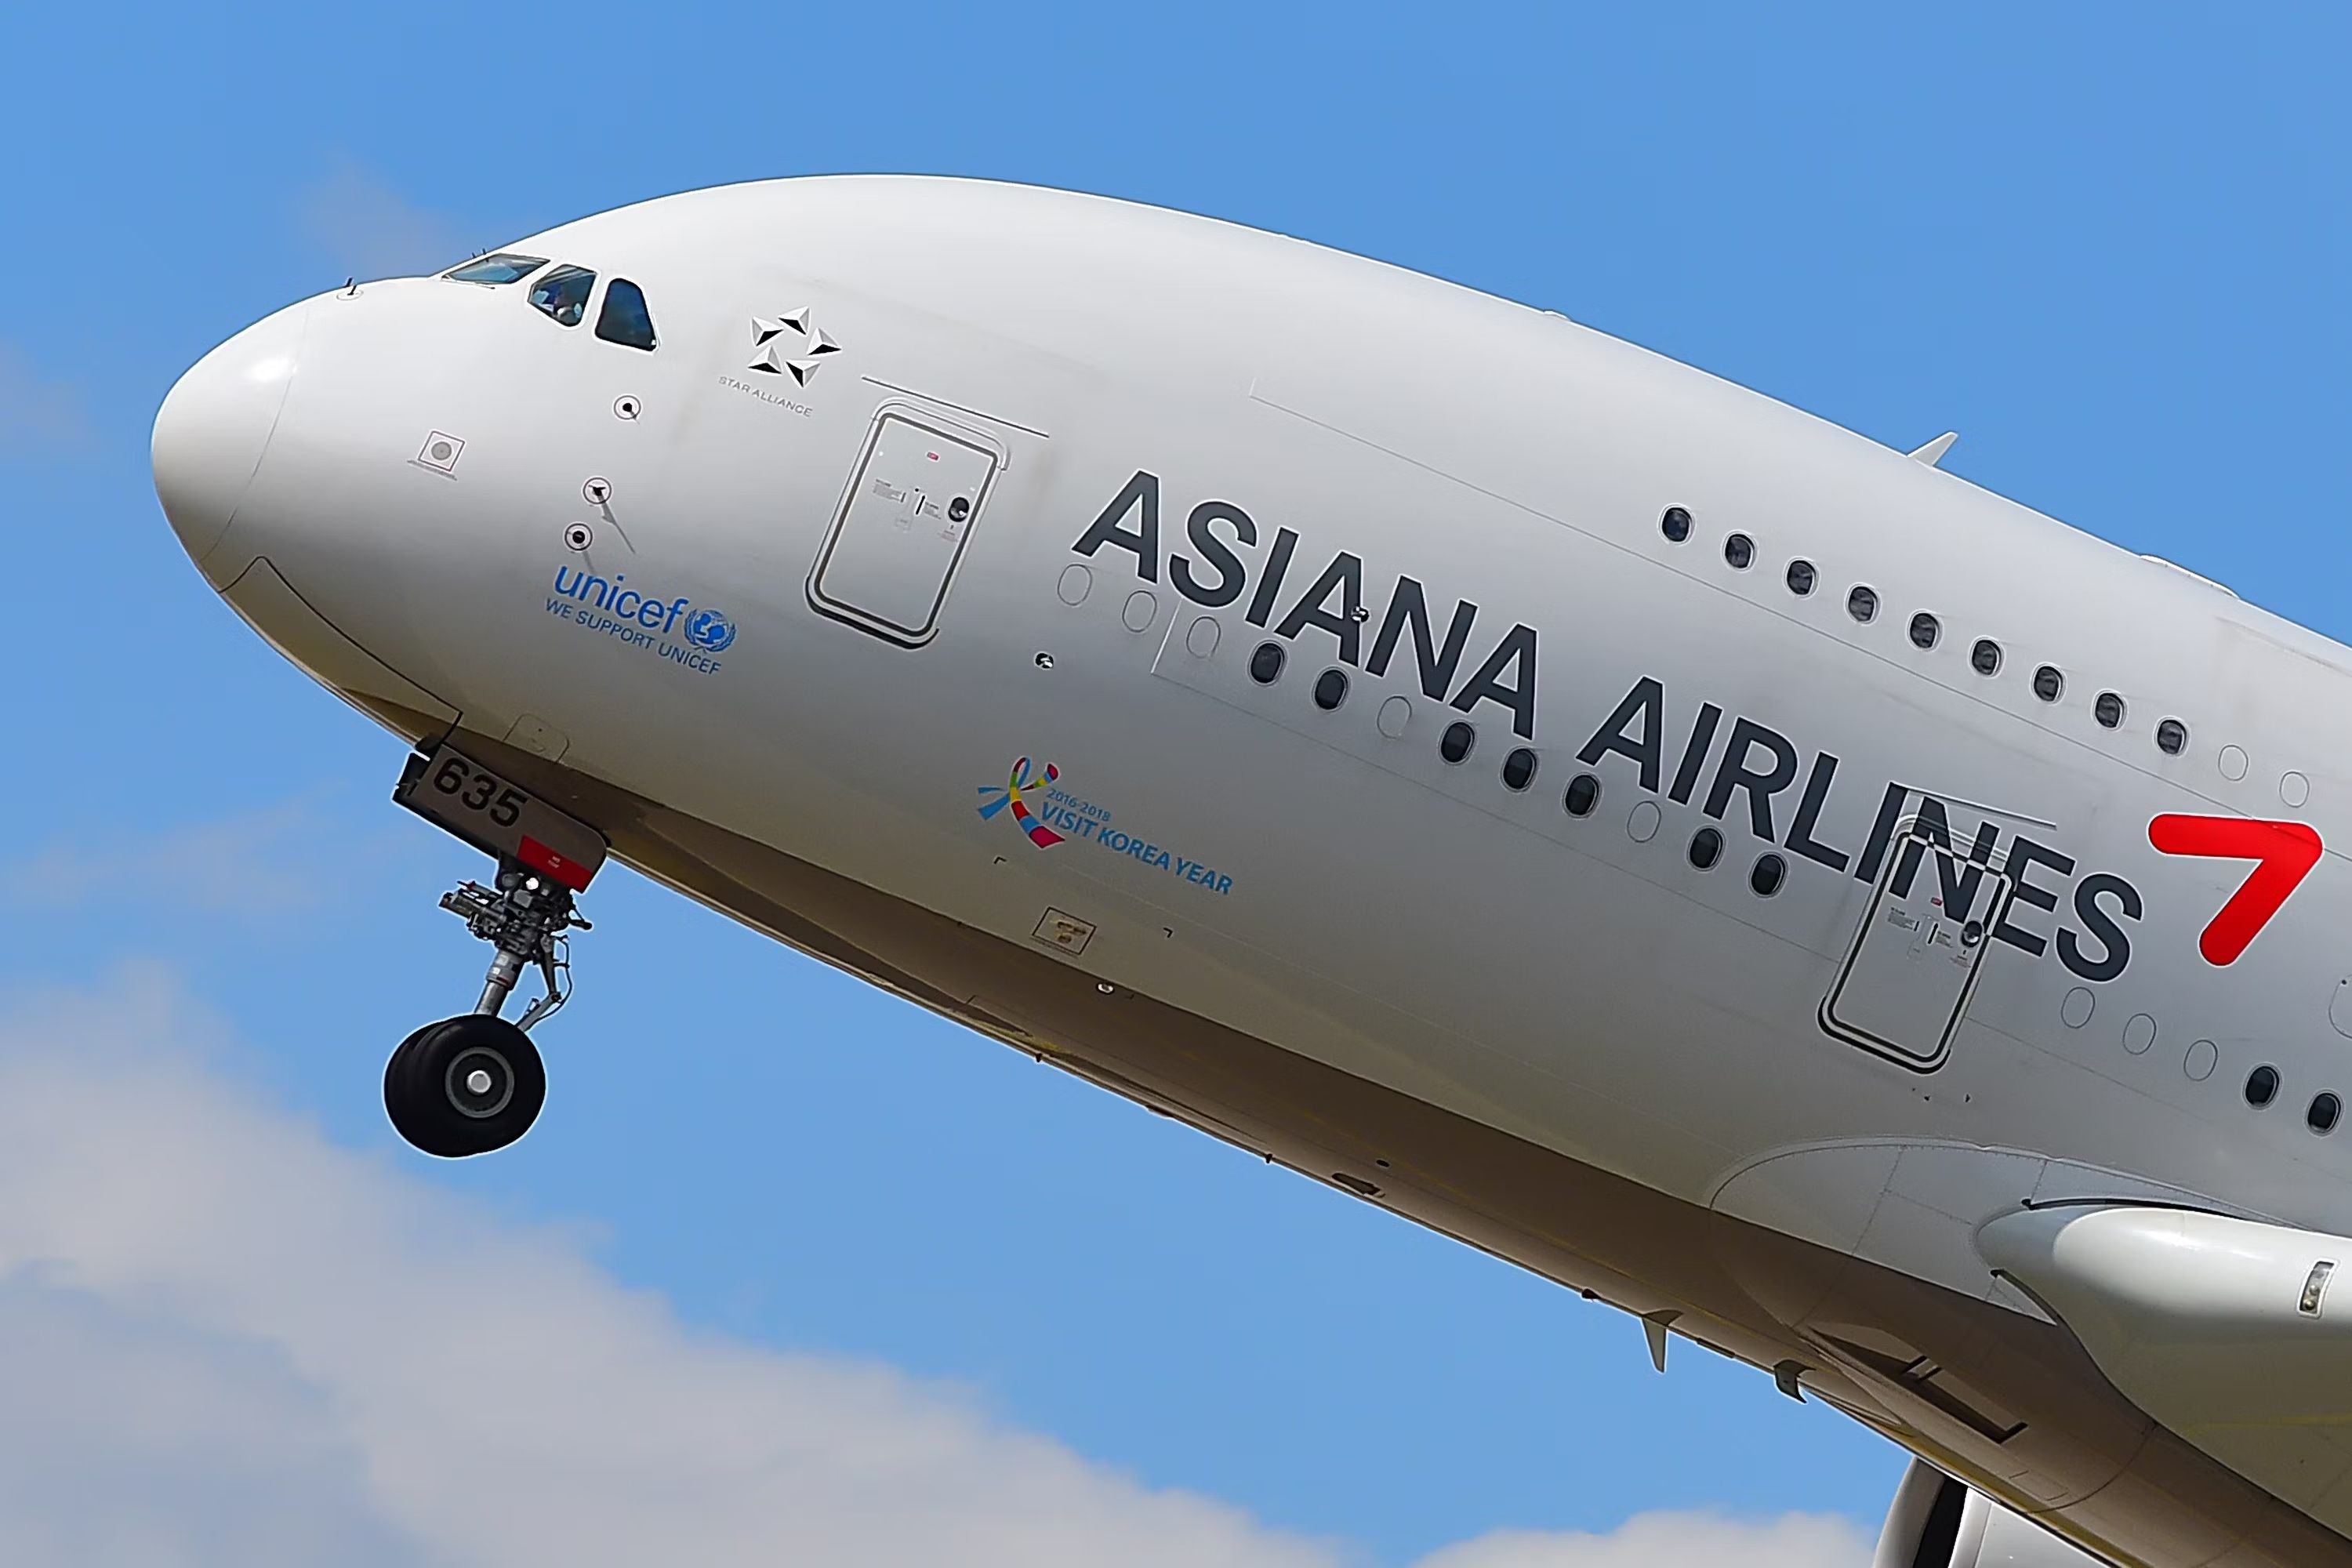 Asiana A380 taking off